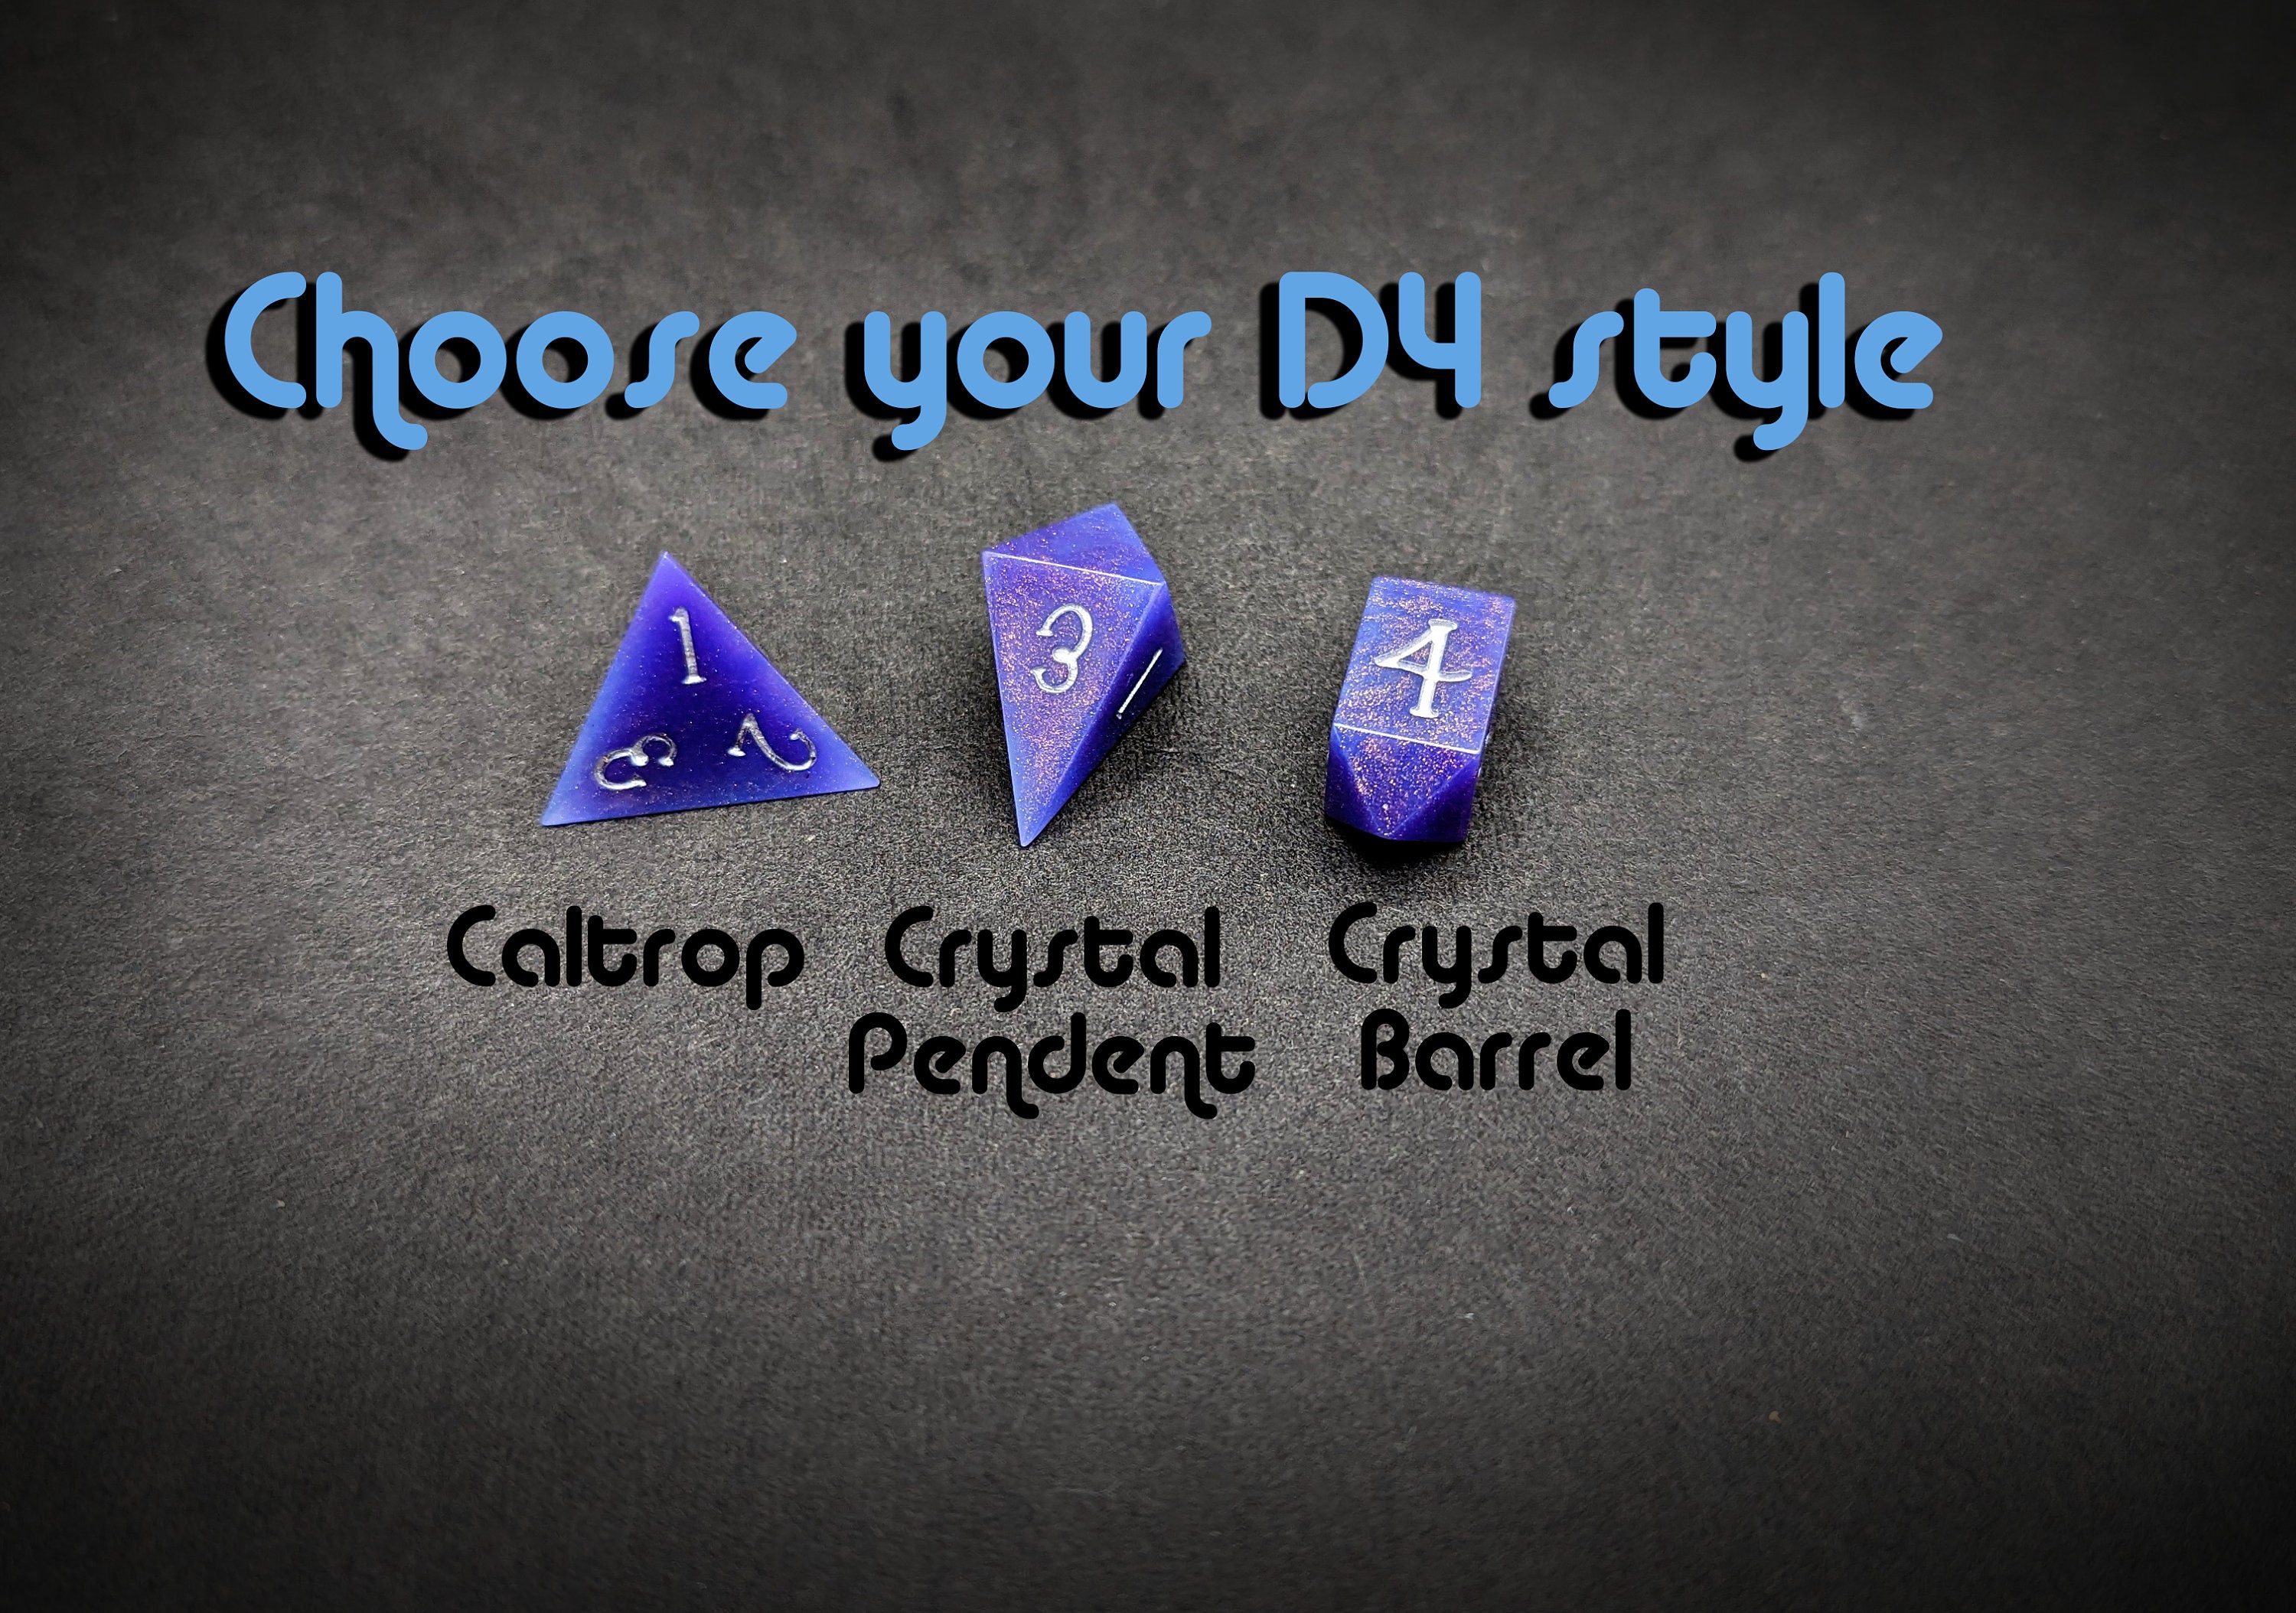 DND Dice Mold Silicone 7 Standard Polyhedral Sharp Edge Dice Slab Mould for  D&D, Tabletop RPG - CZYY